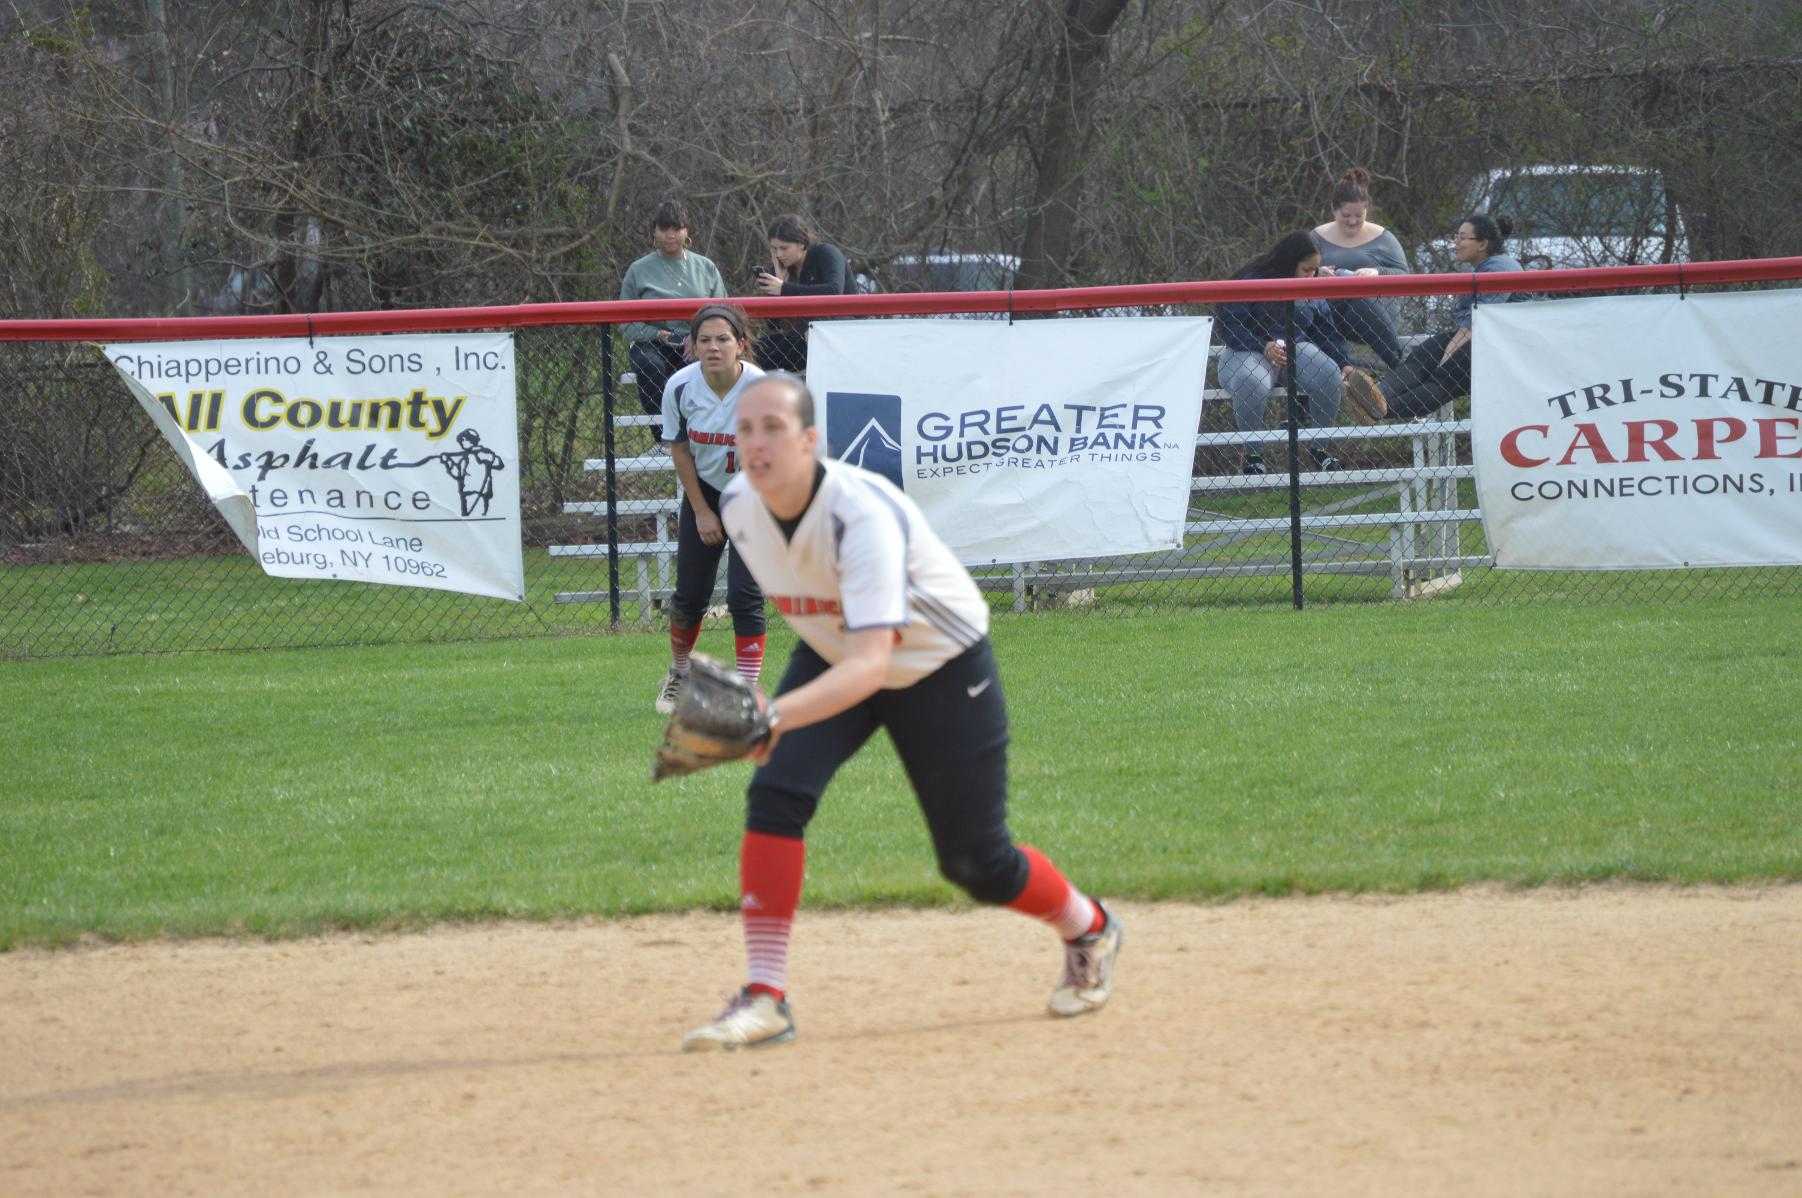 LONG BALL LEADS LADY CHARGERS TO SWEEP BLOOMFIELD COLLEGE